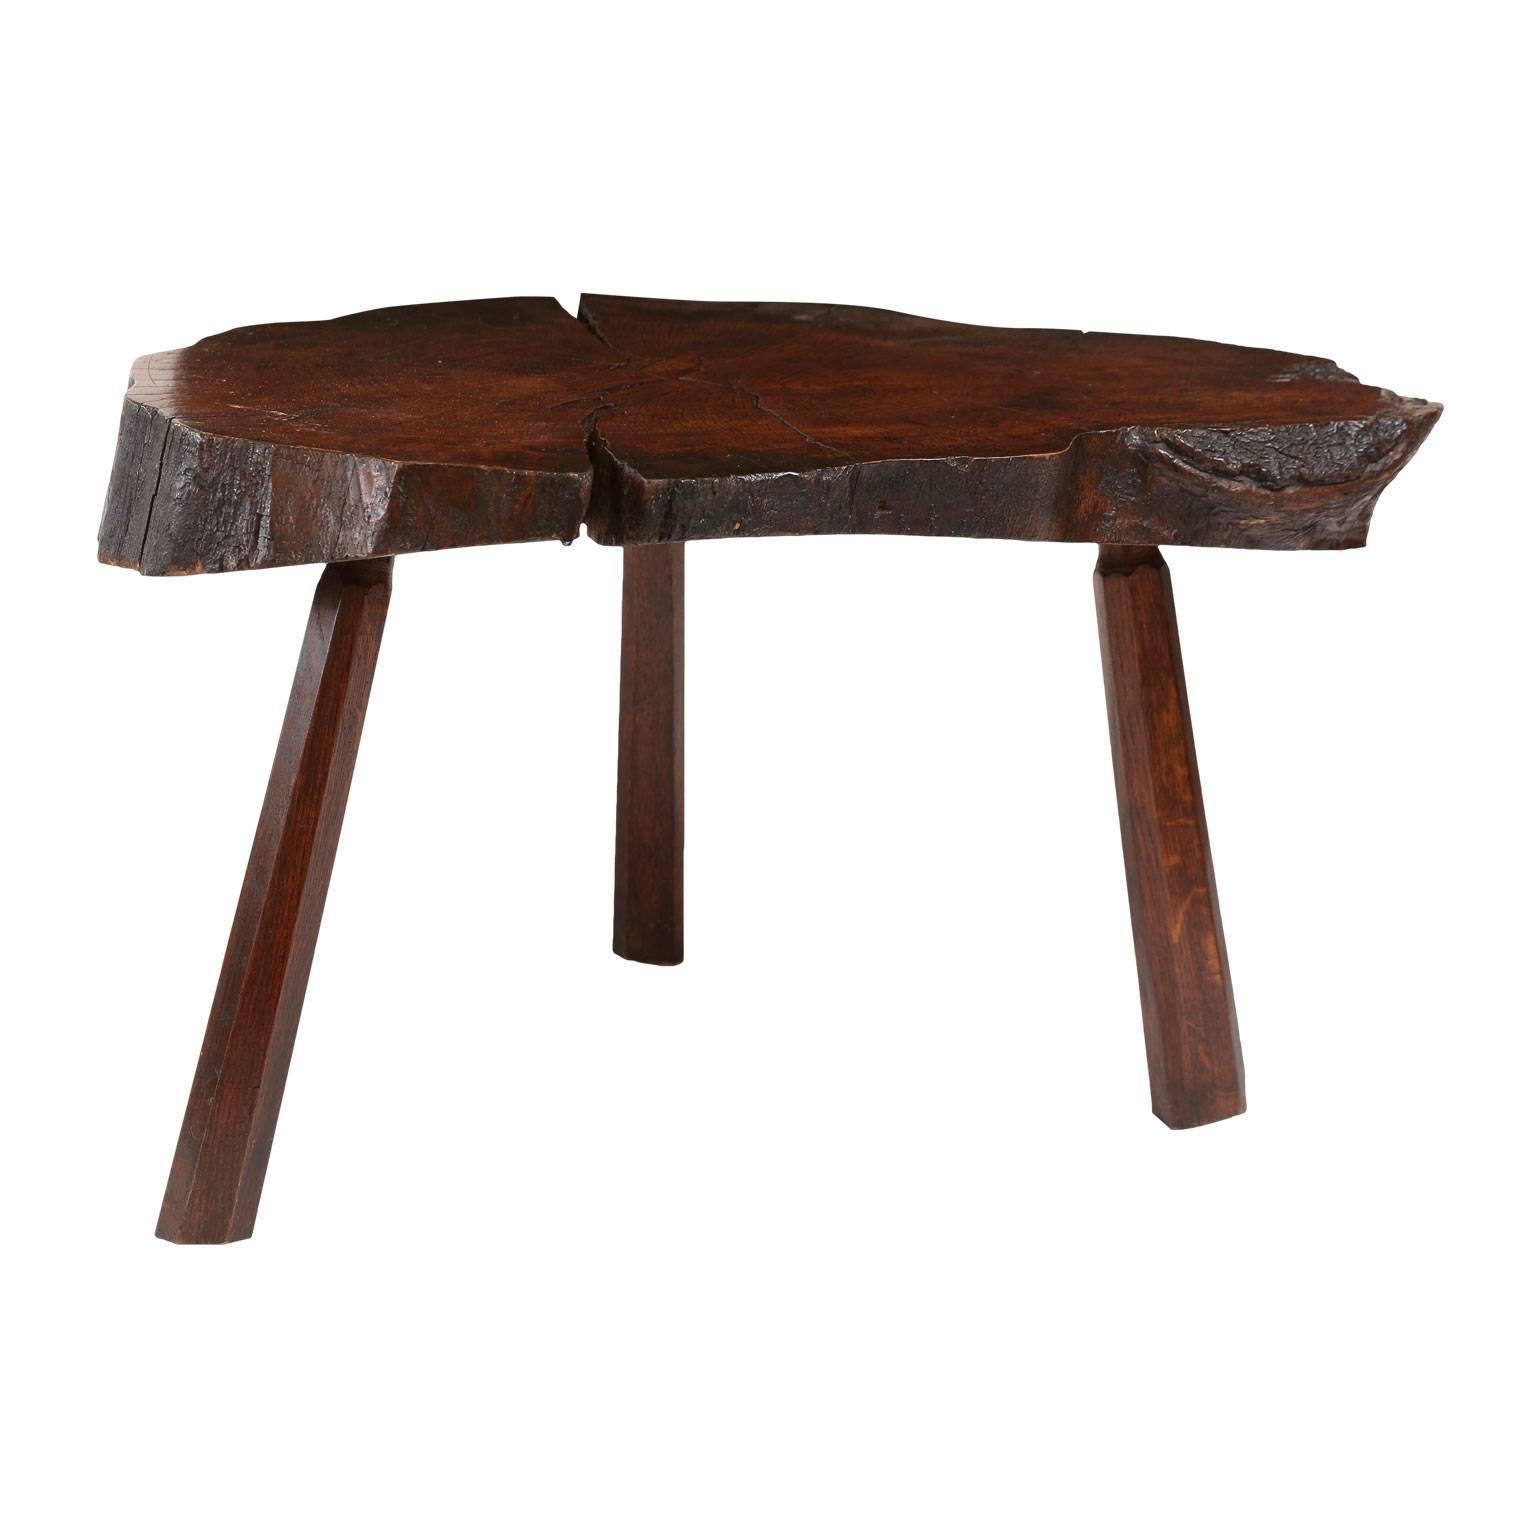 Vintage tree trunk coffee table - or low table - with natural edge from the cross-section of a tree trunk. Purchased in Belgium, this table is supported by three pegged-construction wooden legs and features a rich, warm patina.